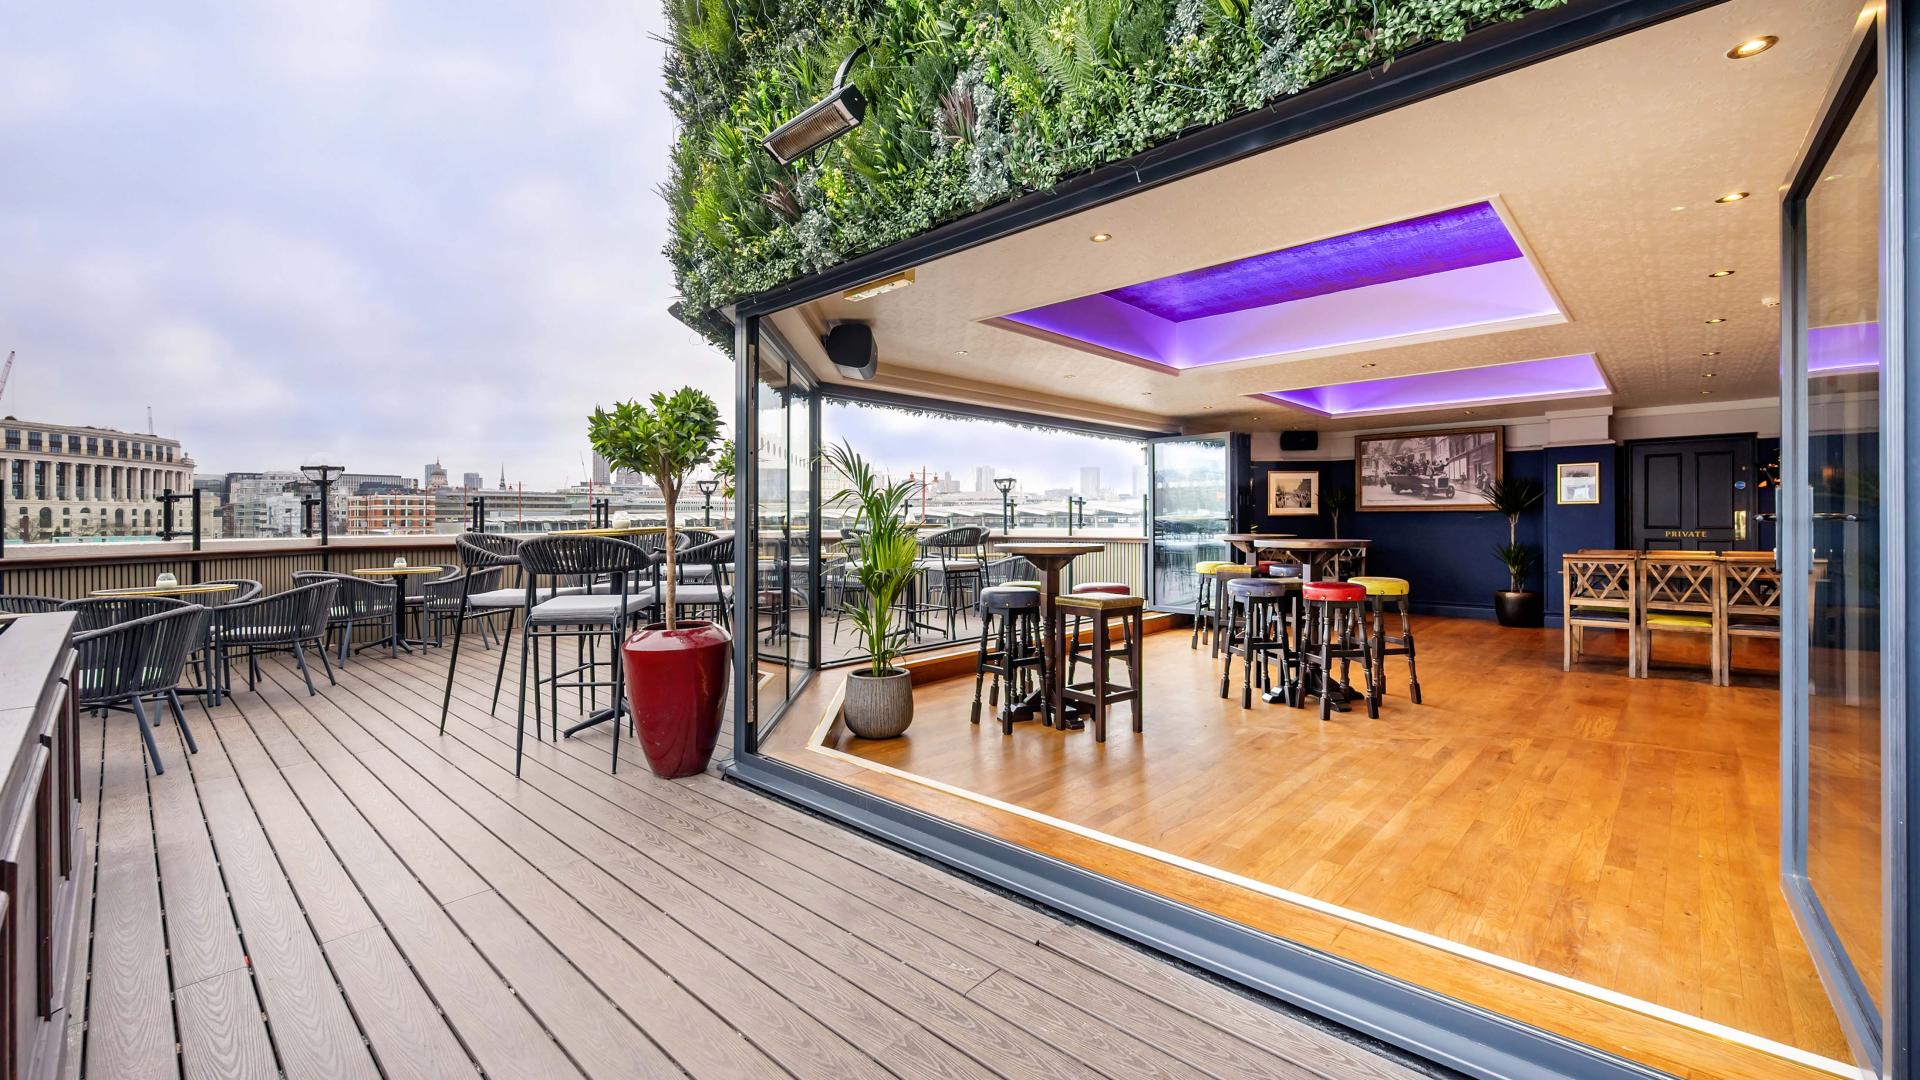 Cheap Rooftop Bars for Hire in London